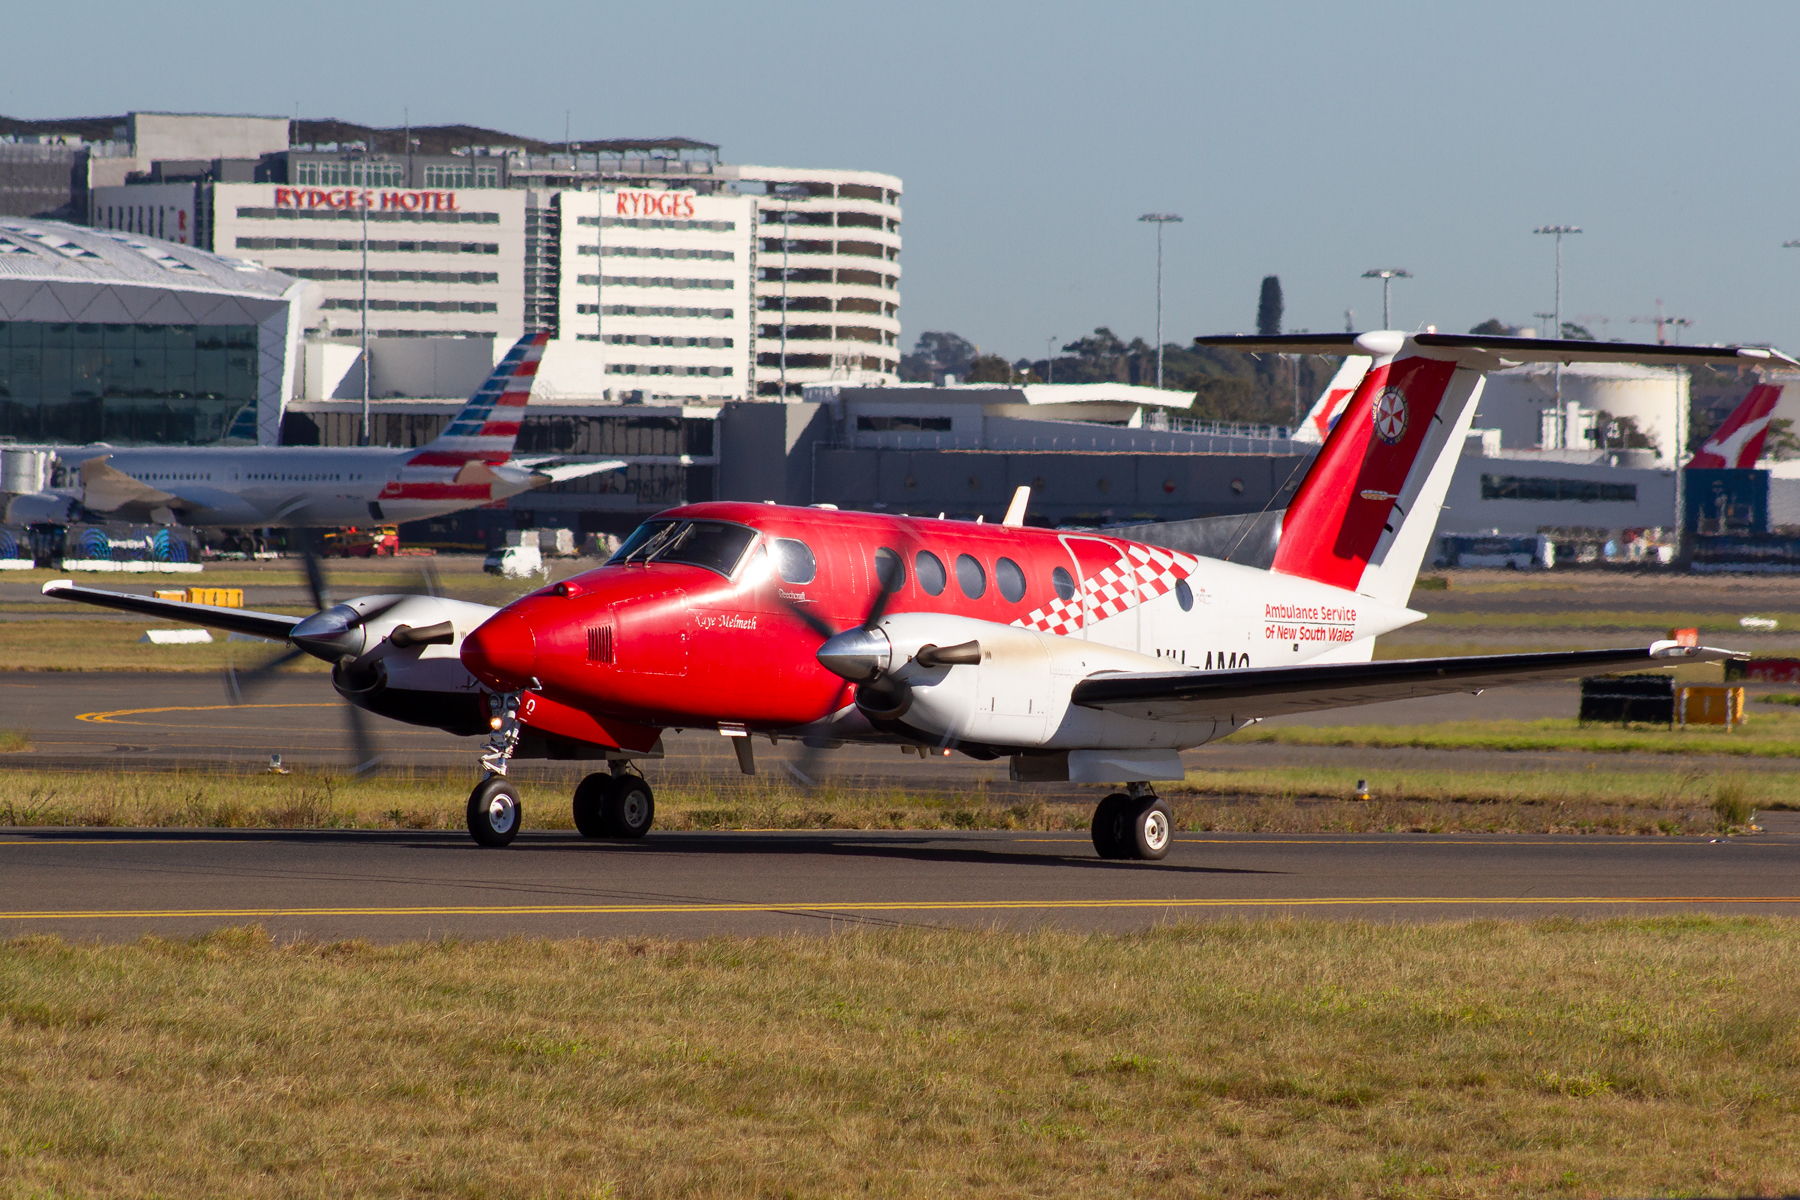 RFDS - Royal Flying Doctor Service (South Eastern Section) Beech King Air 200C VH-AMQ at Kingsford Smith